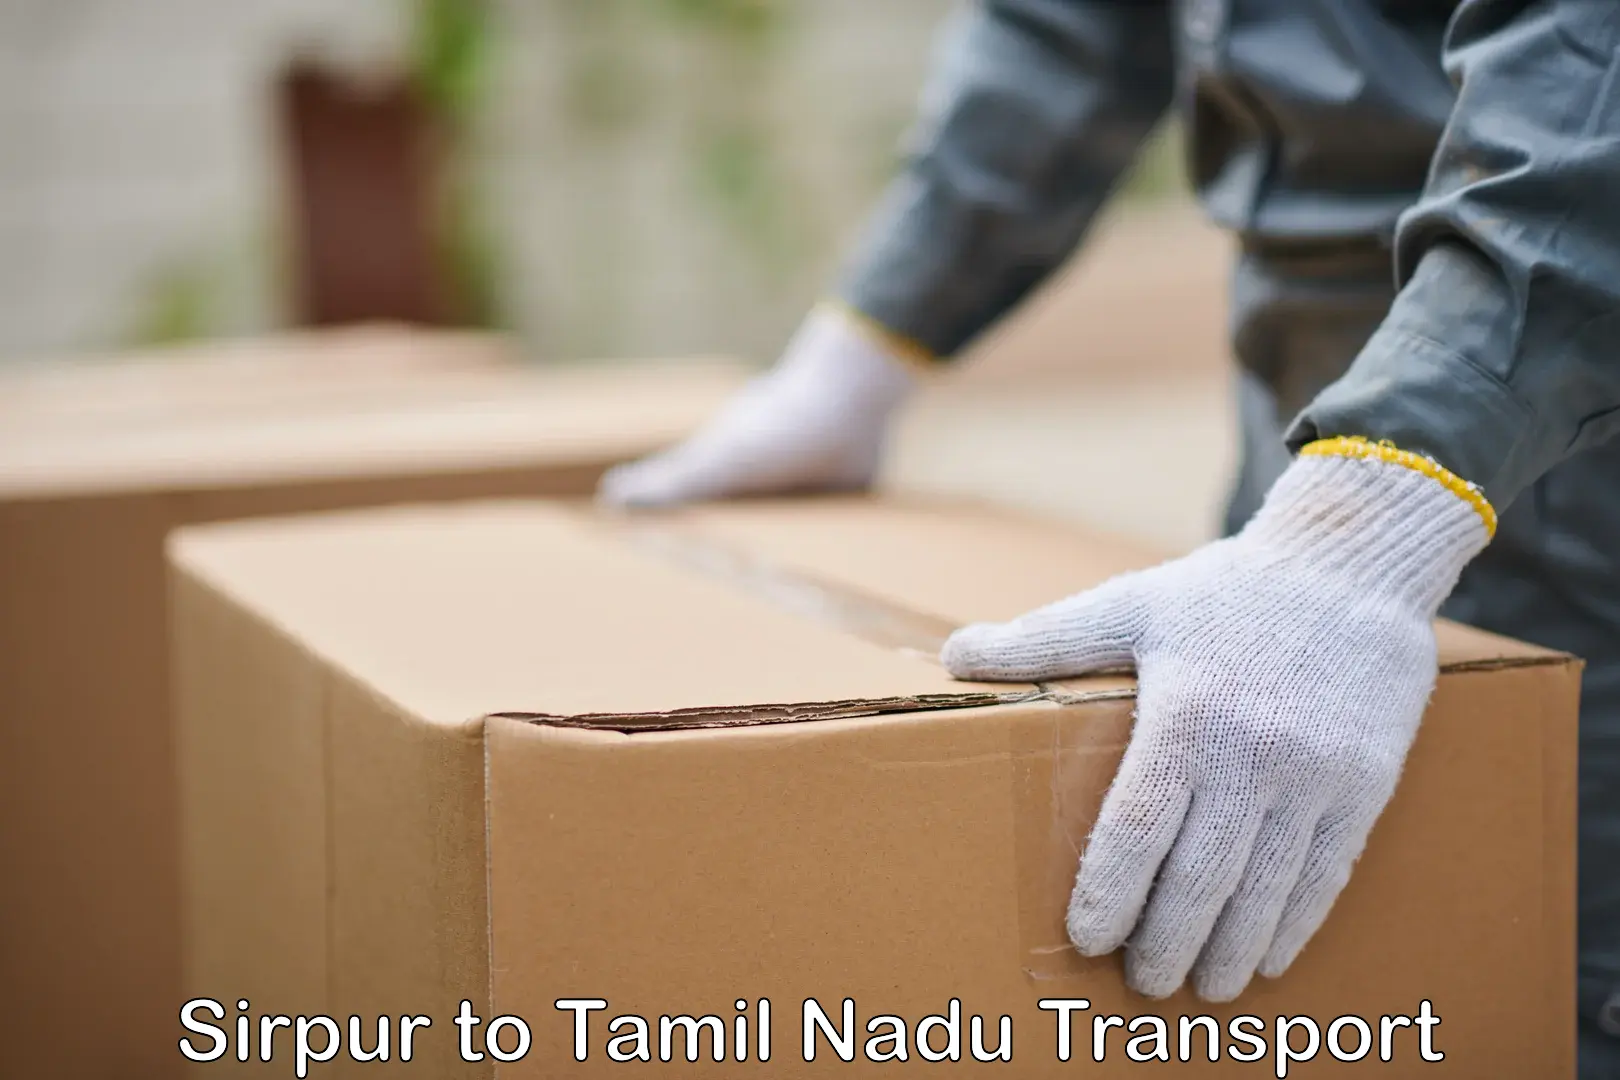 Delivery service Sirpur to Tamil Nadu